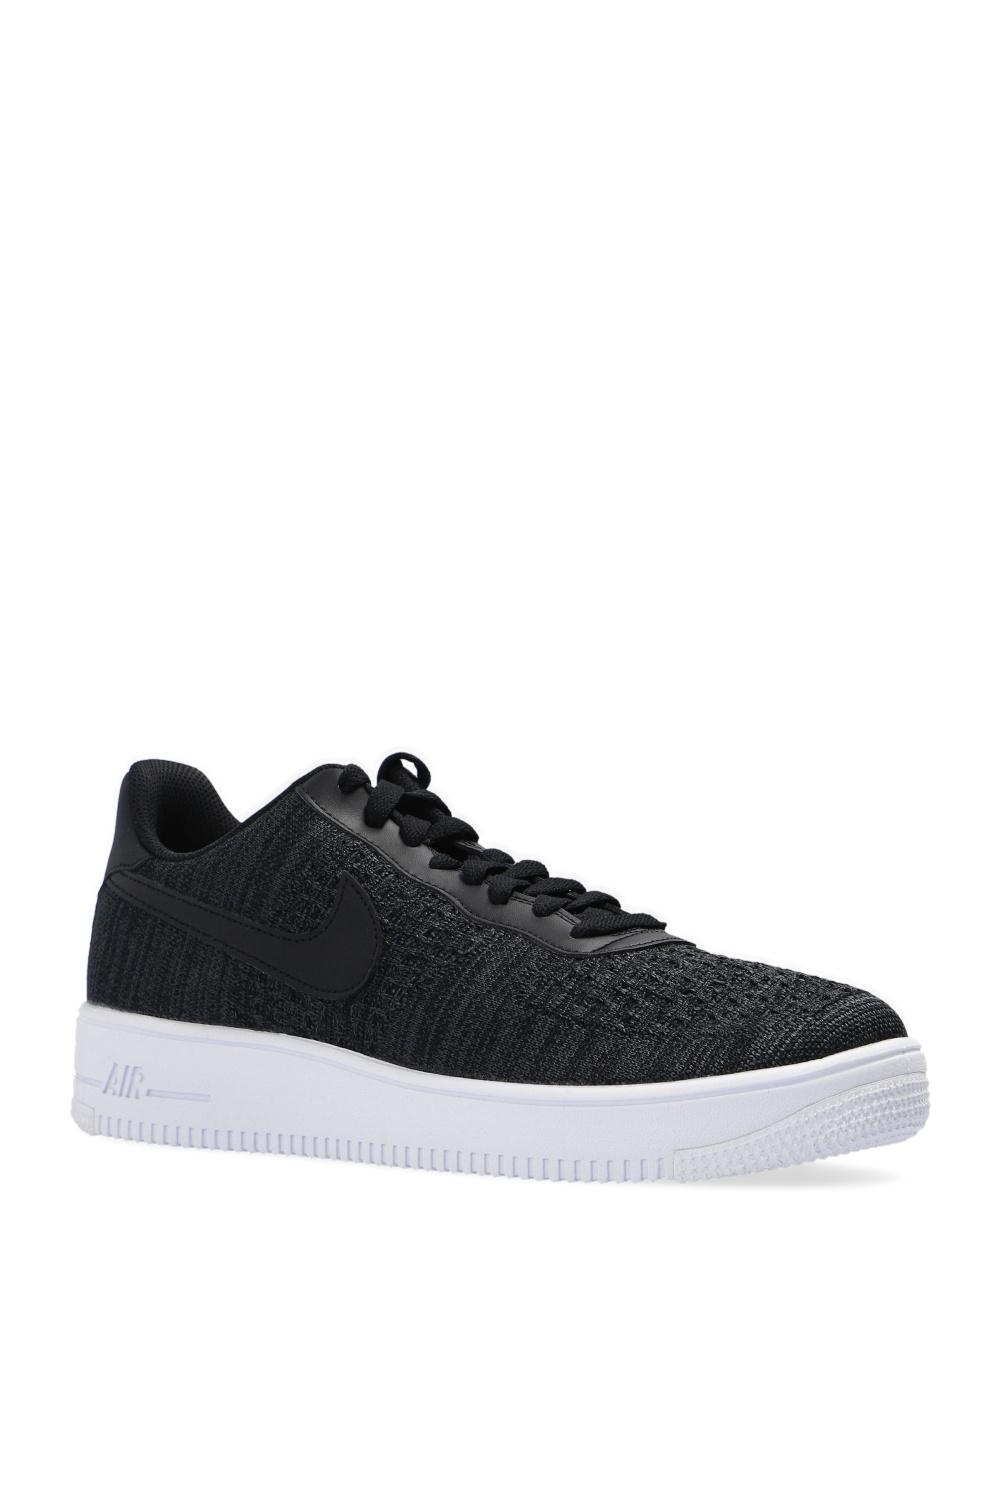 seven extract Rarity Nike Synthetic Air Force 1 Flyknit 2.0 in Black,White,Anthracite (Black)  for Men | Lyst